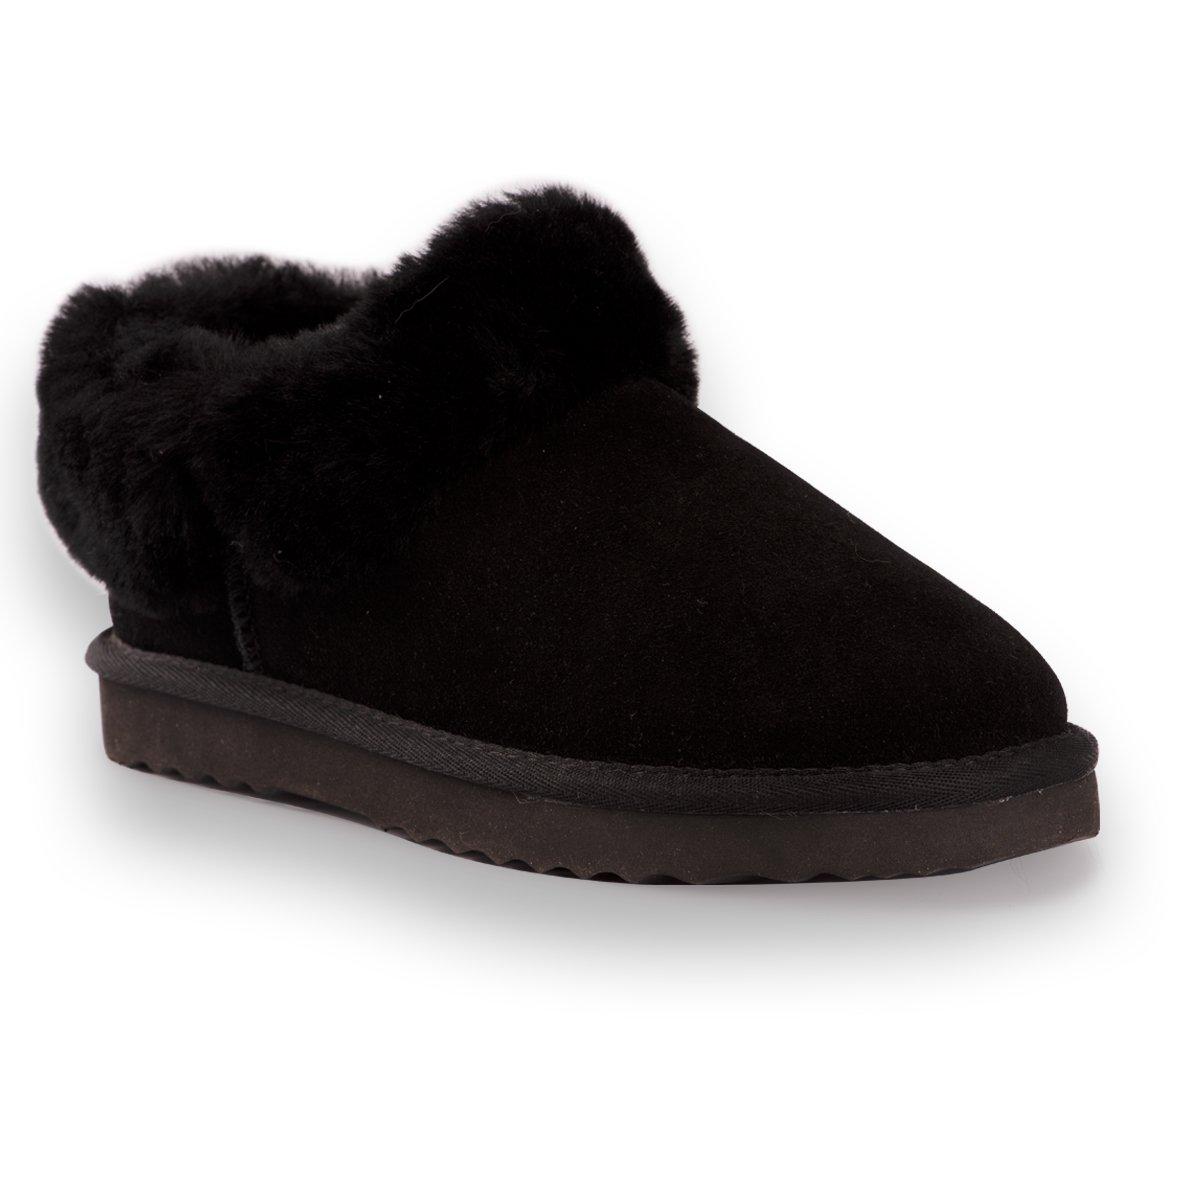 Sheepskin Wool Traditional Ankle Slippers